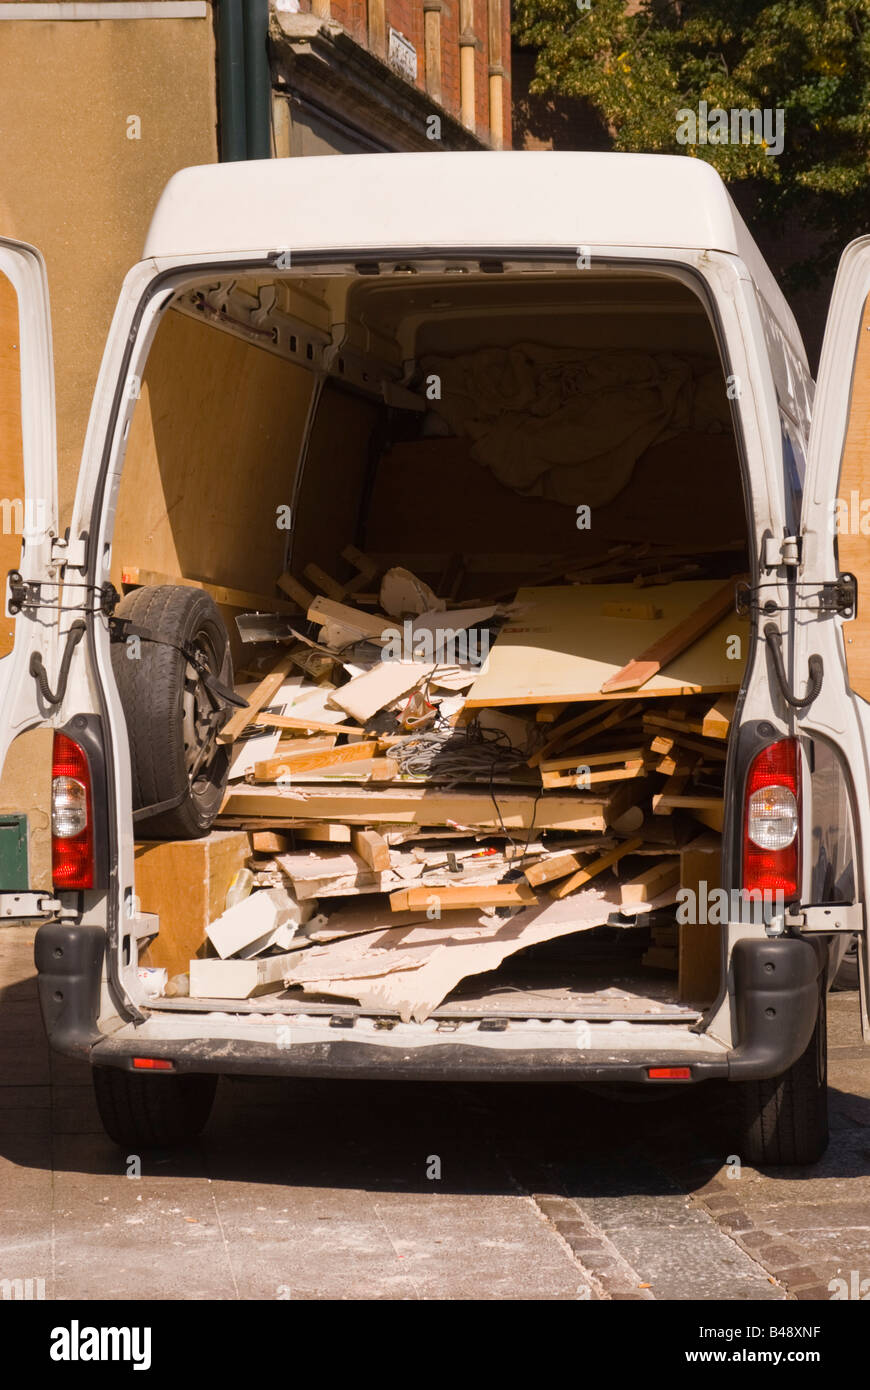 View of the back of a work van filled with rubbish from a building job after clearing up. Stock Photo